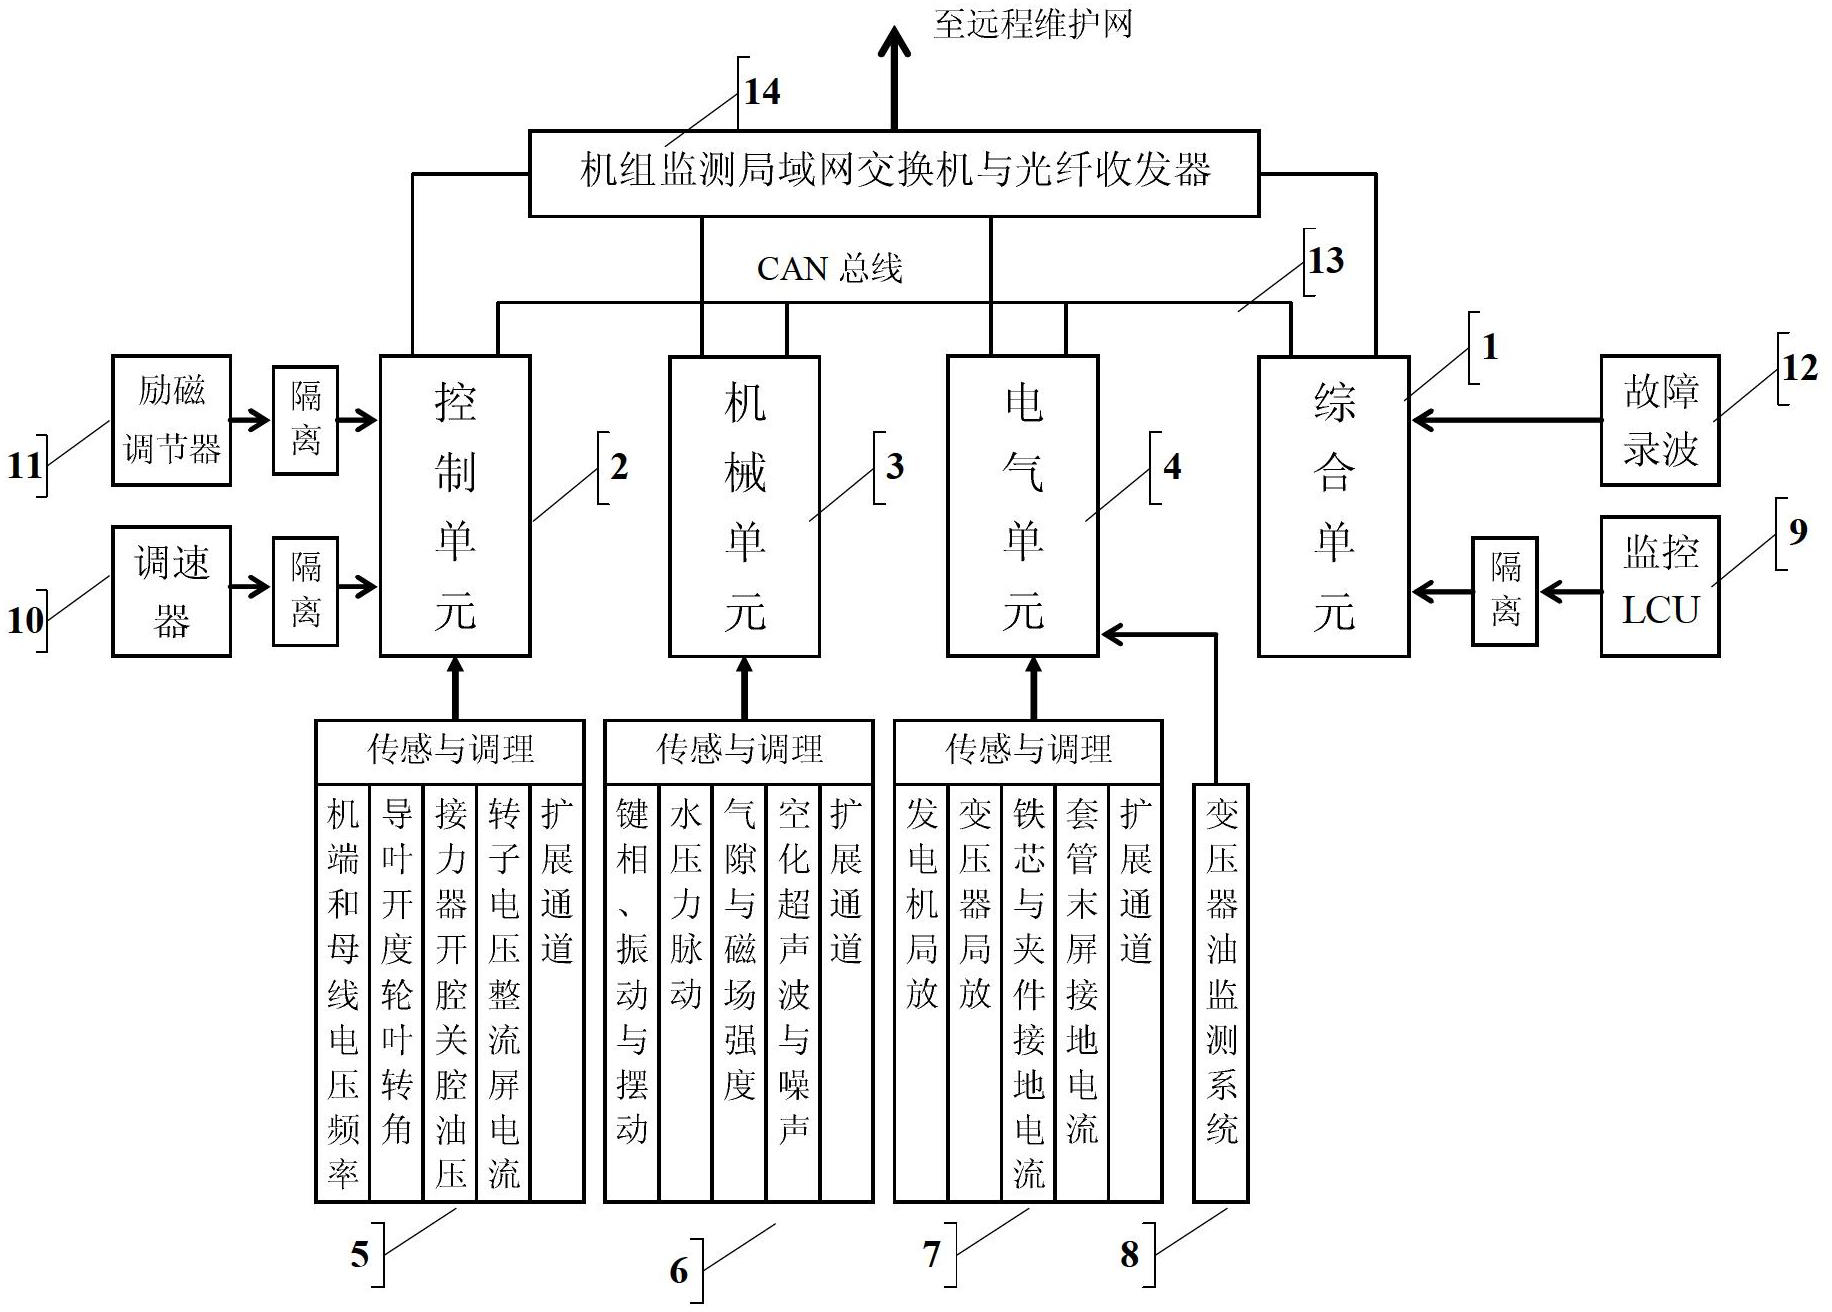 Omnibearing integrated coordination online monitoring system for hydro-power generating unit